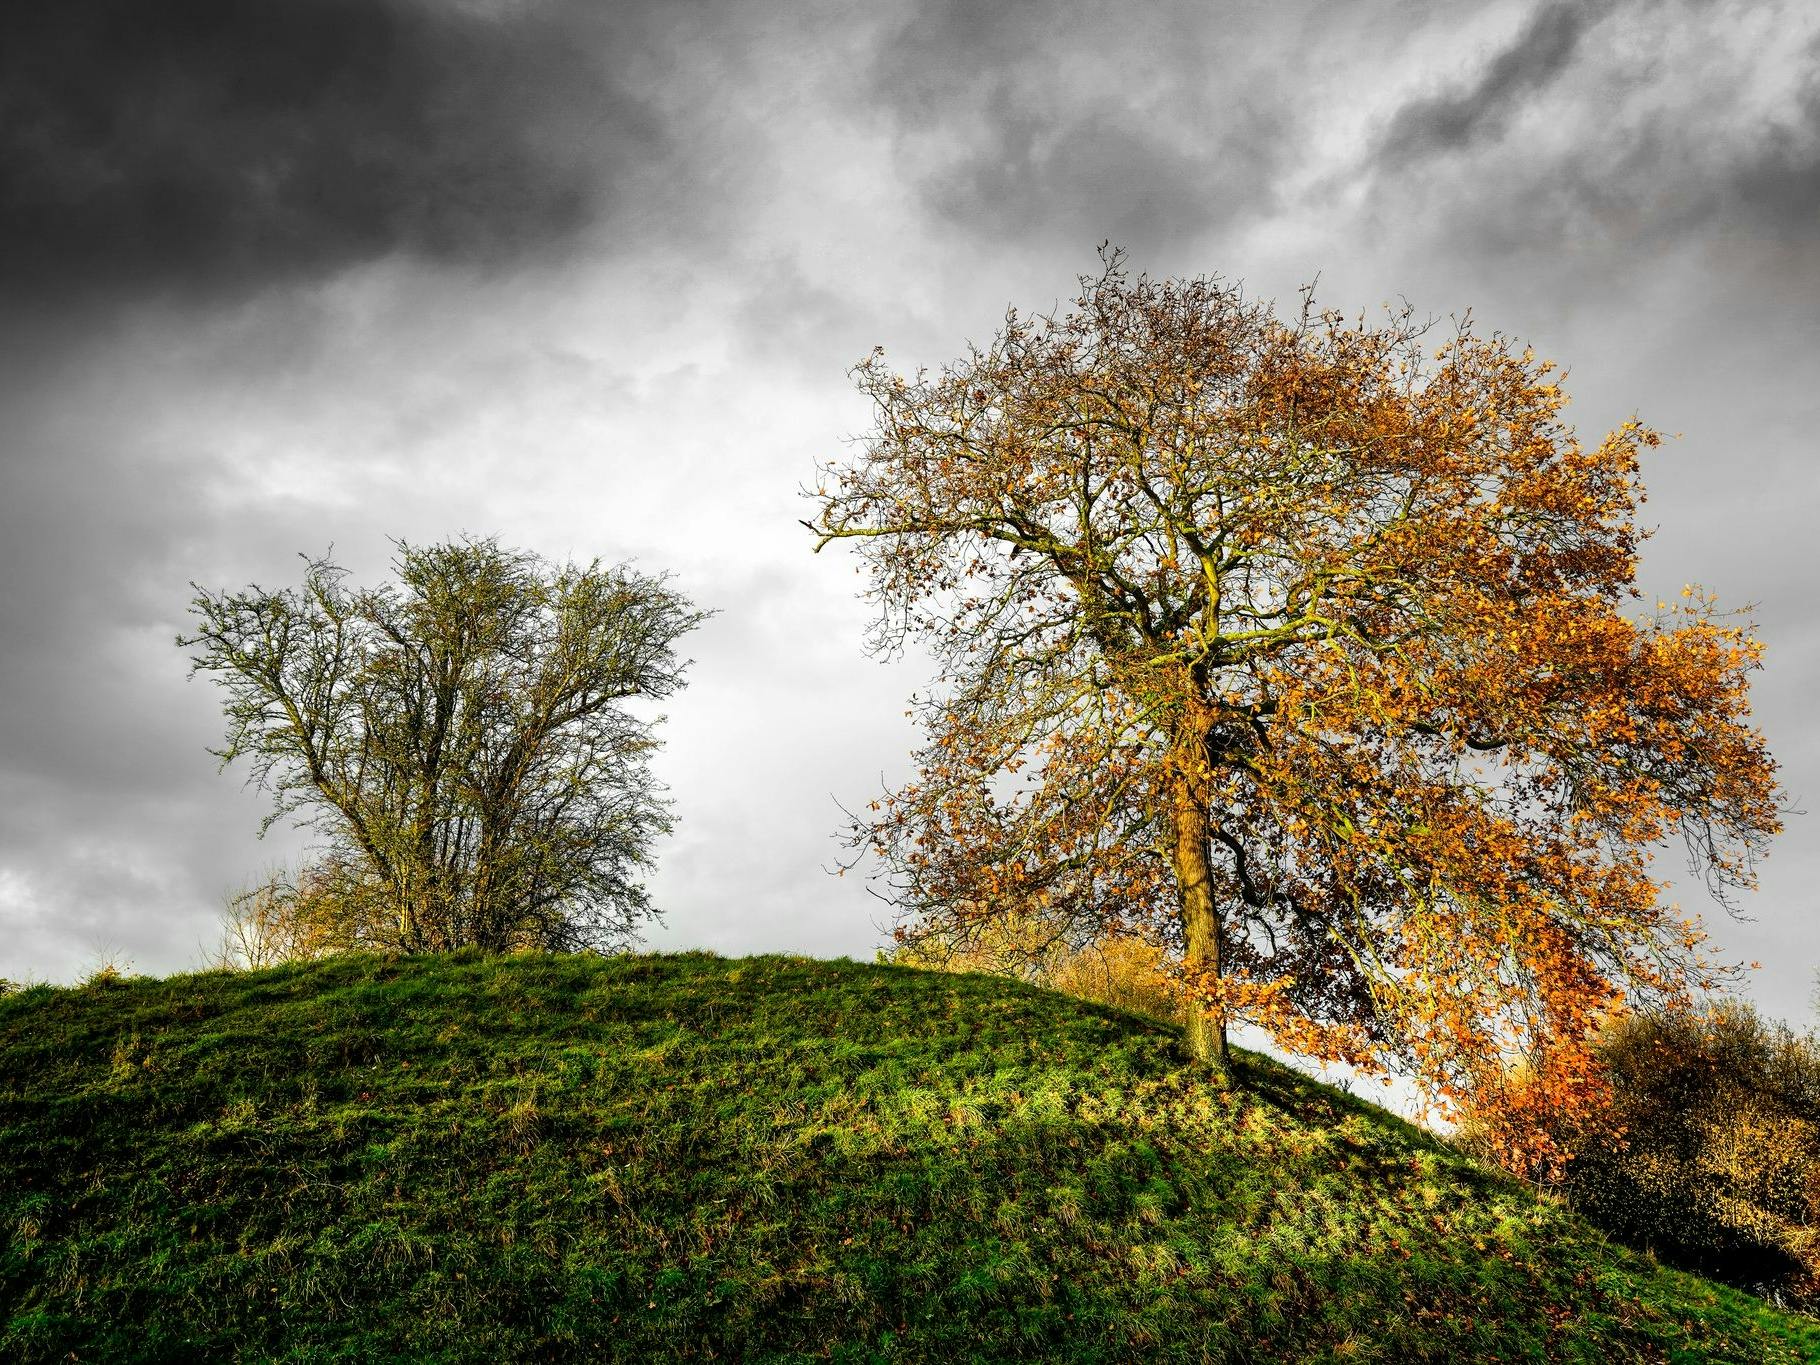 Dramatic image of the mound at church Norton two autumnal trees and moody grey skies 